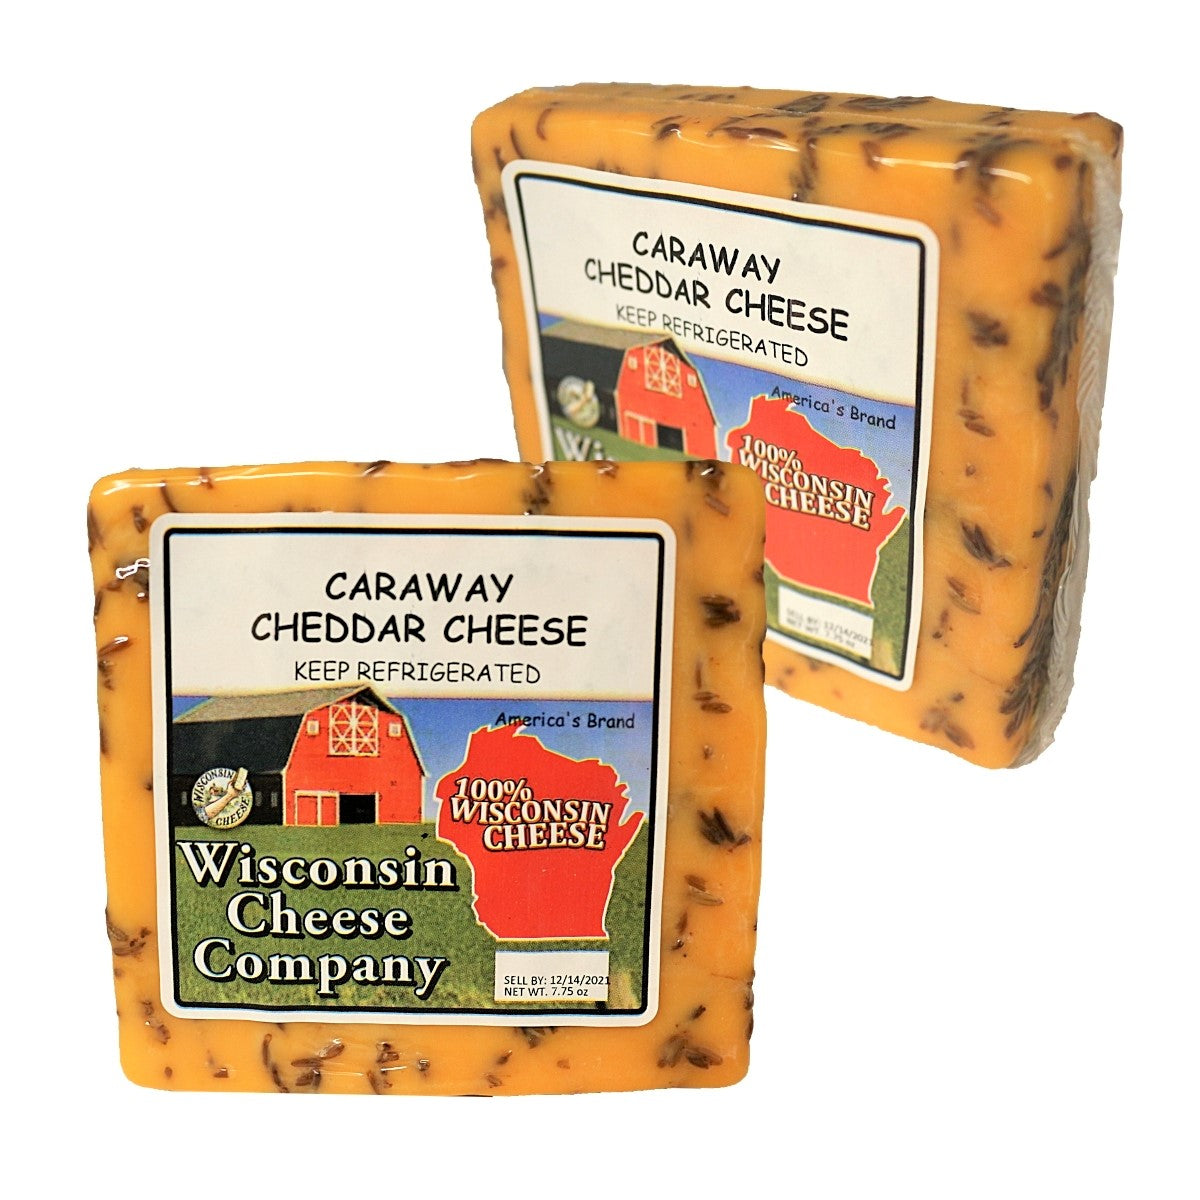 Two blocks of Caraway Cheddar Cheese